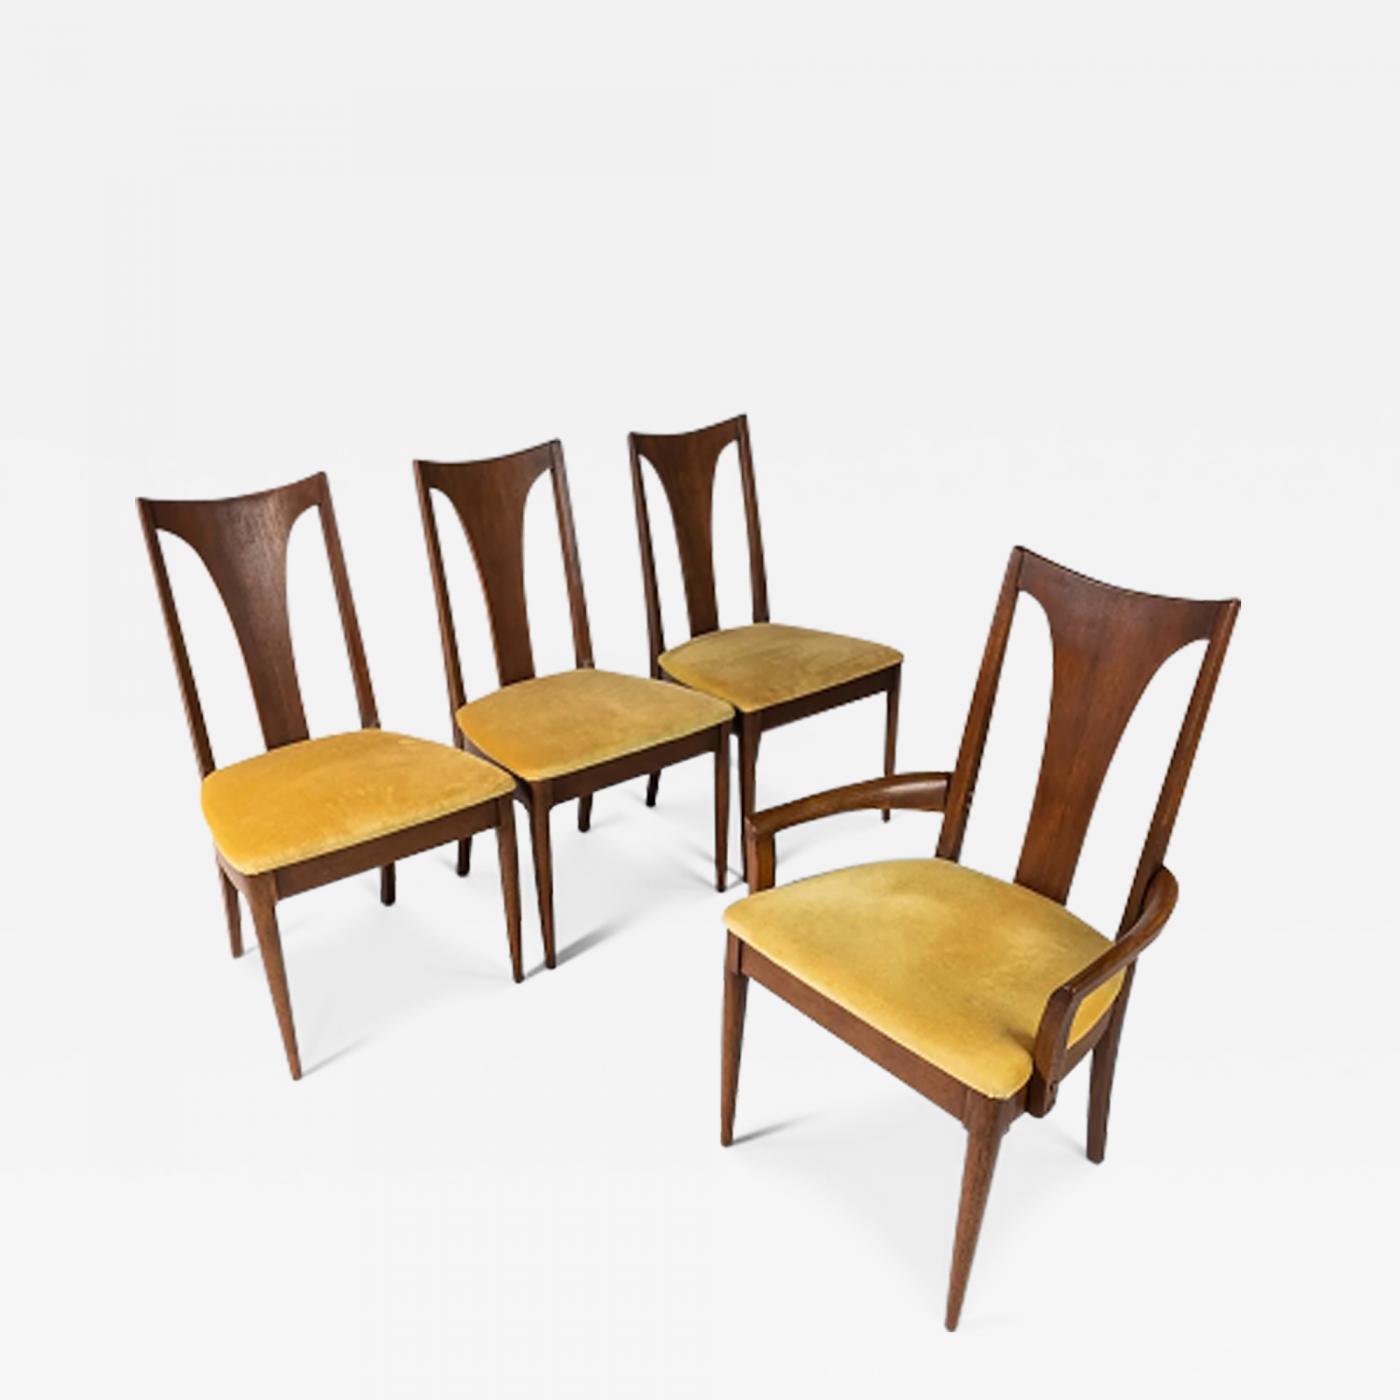 https://cdn.incollect.com/sites/default/files/zoom/-Broyhill-Furniture-Set-of-Four-4-Mid-Century-Modern-Brasilia-Dining-Chairs-in-Walnut-by-Broyhill-587837-2774792.jpg